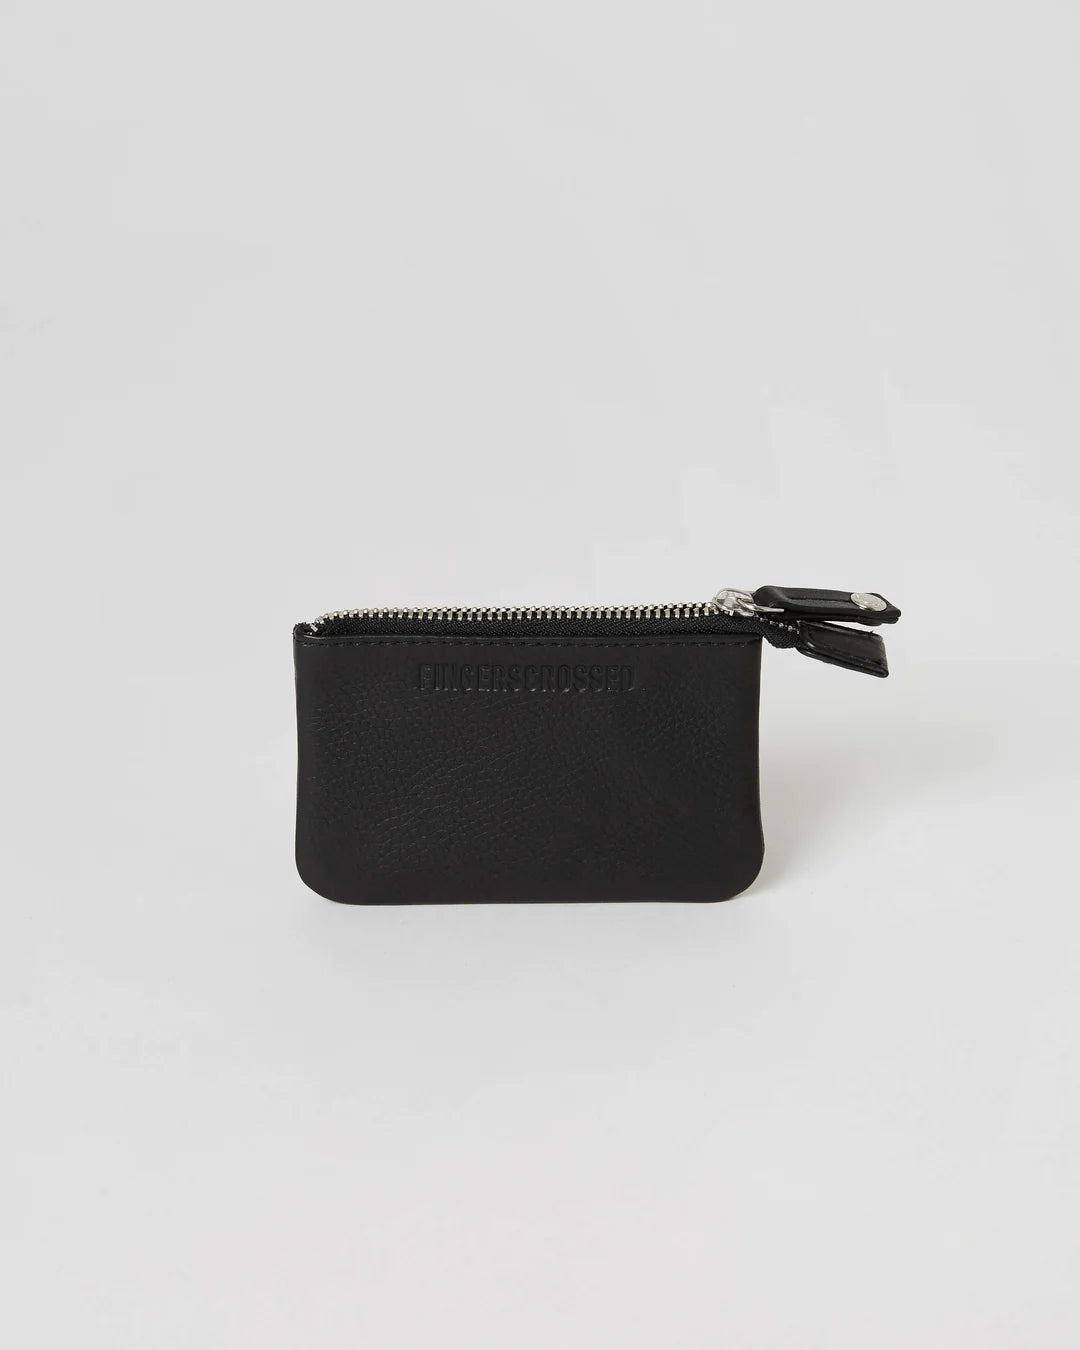 Fingerscrossed #Leather Pouch Small・レザーポーチ | CYCLISM